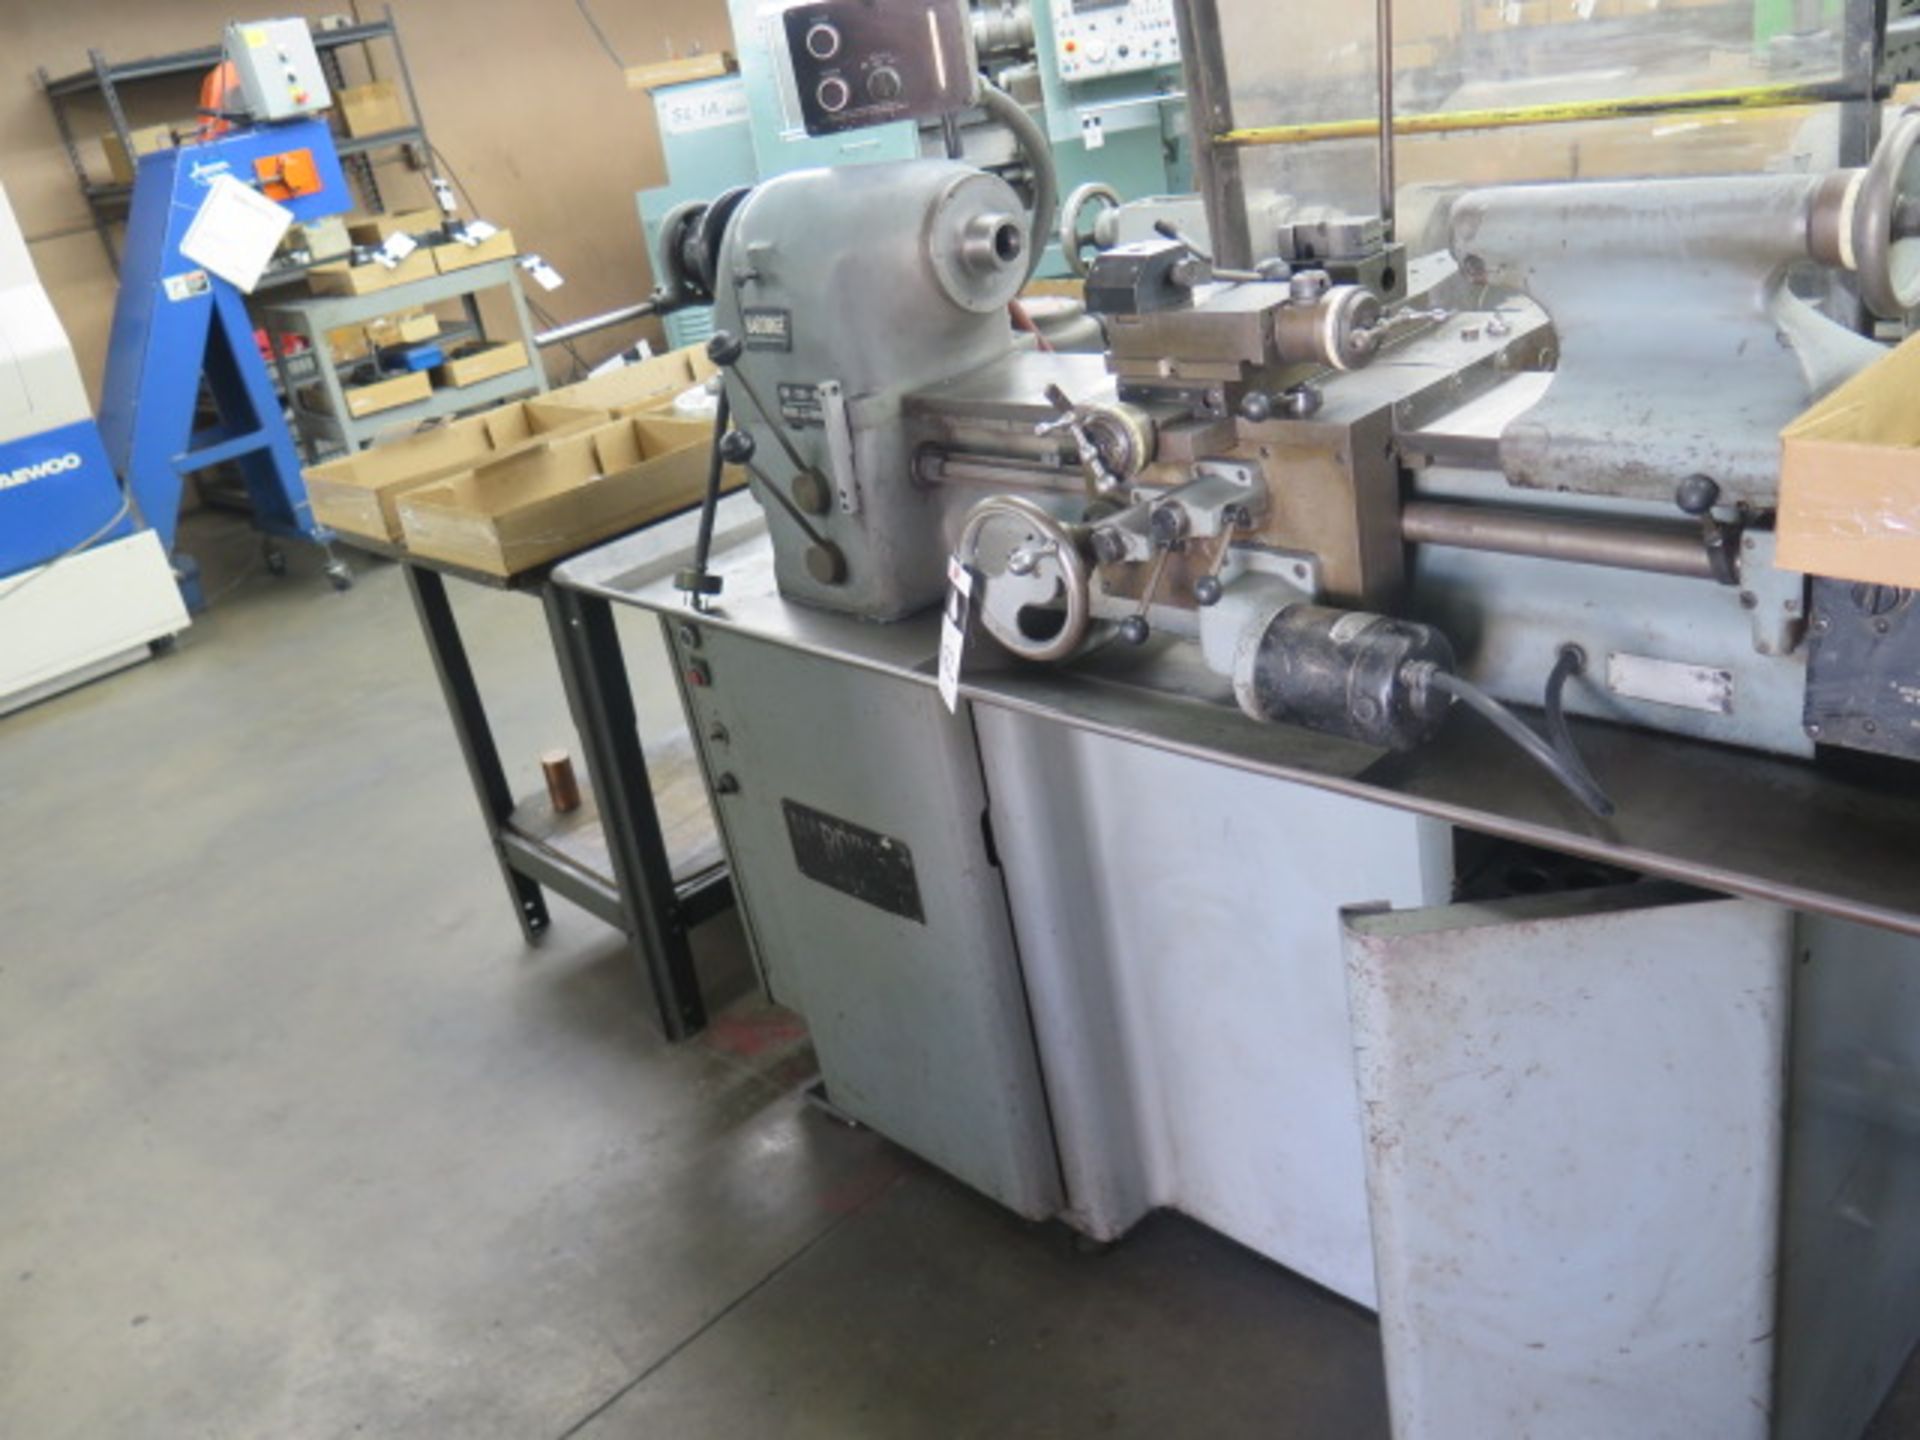 Hardinge TFB-H Wide Bed Second OP Lathe w/ 125-3000 RPM, Tailstock, Power Feeds, KDK, SOLD AS IS - Image 3 of 13